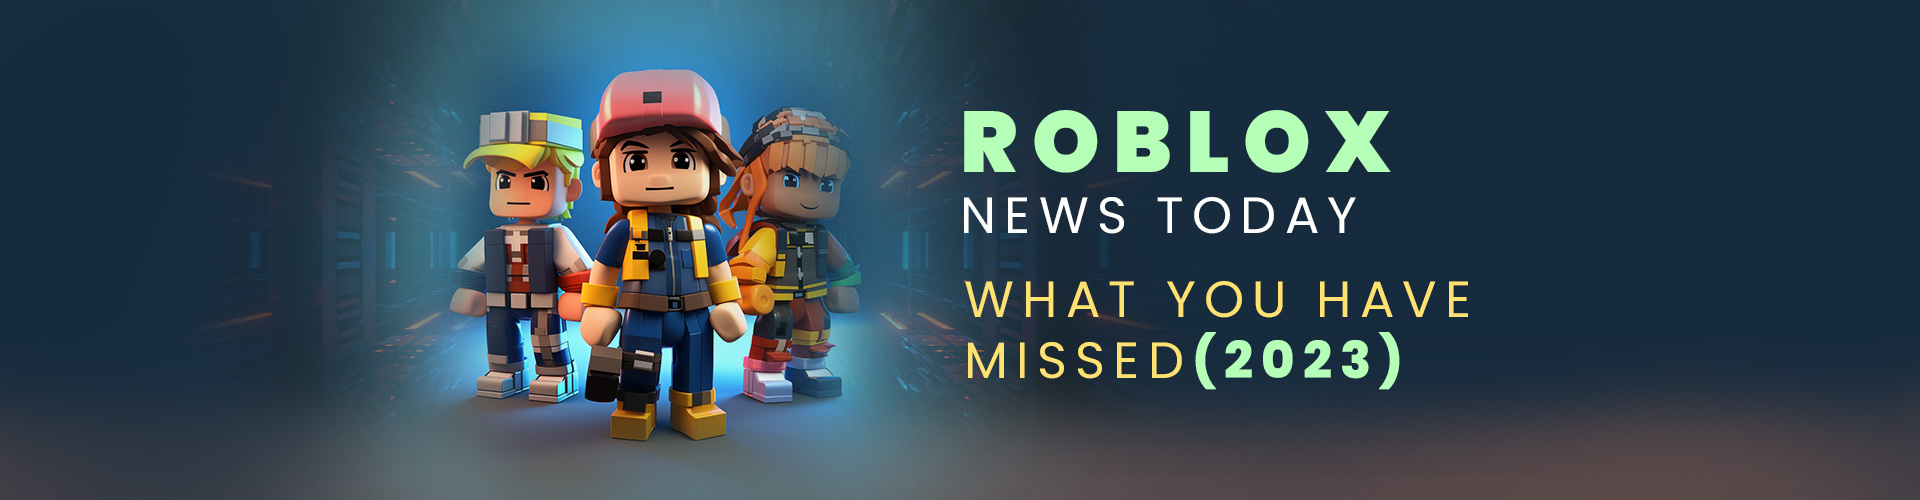 Roblox News Today